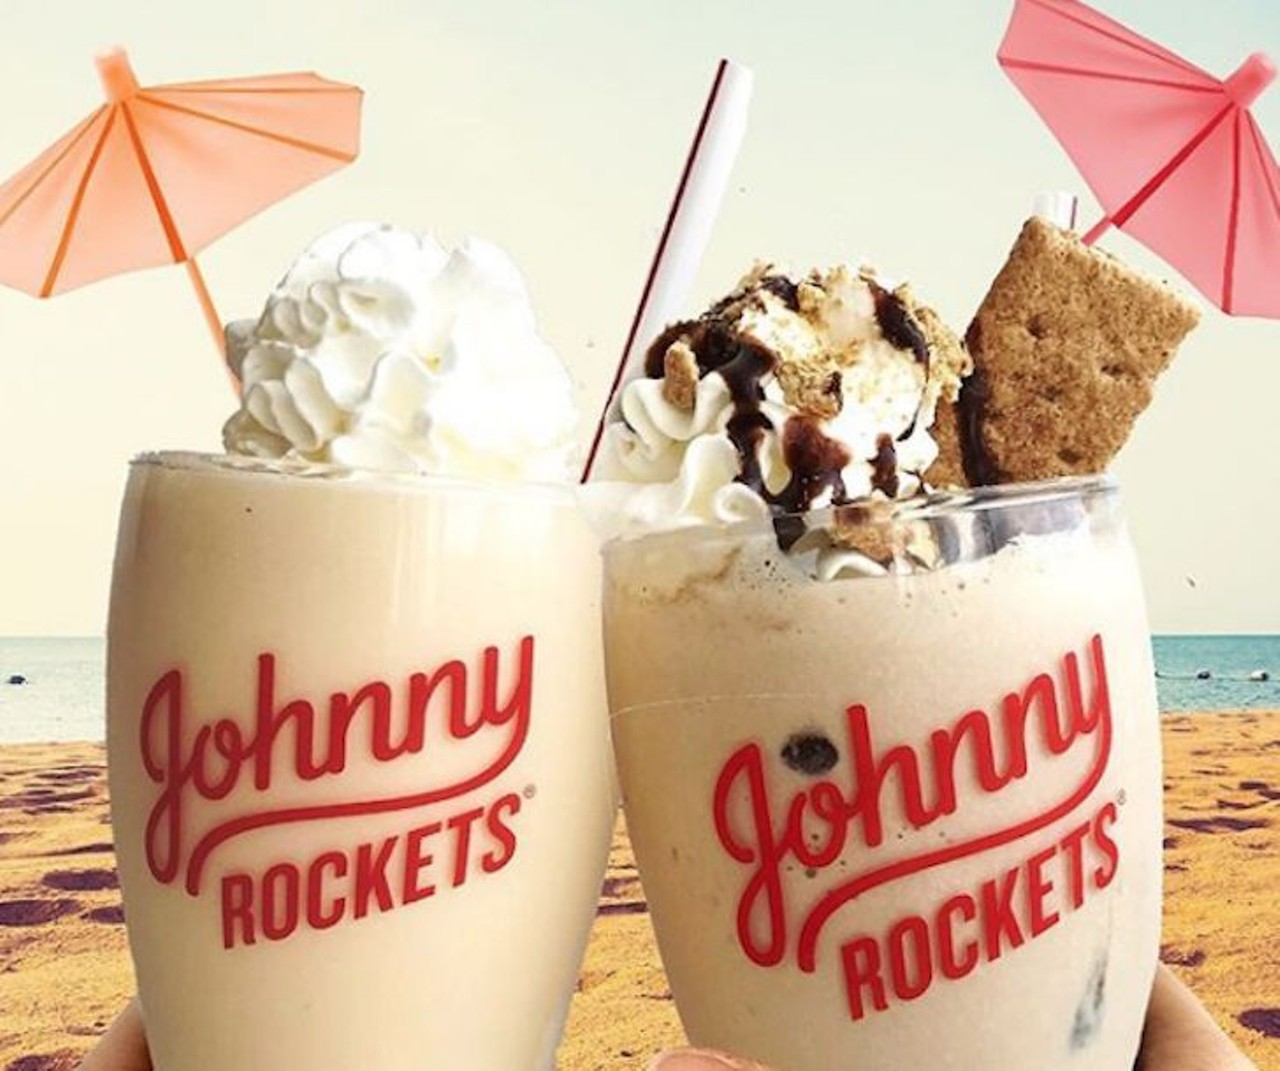 Johnny Rockets
Multiple Locations 
Hand-spun real ice cream shakes are a classic staple at Johnny Rockets. These cold treats are available in classic flavors like strawberry, vanilla and chocolate, but also in deluxe flavors including peanut butter banana and orange dreamsicle.
Photo via Instagram/Johnny Rockets